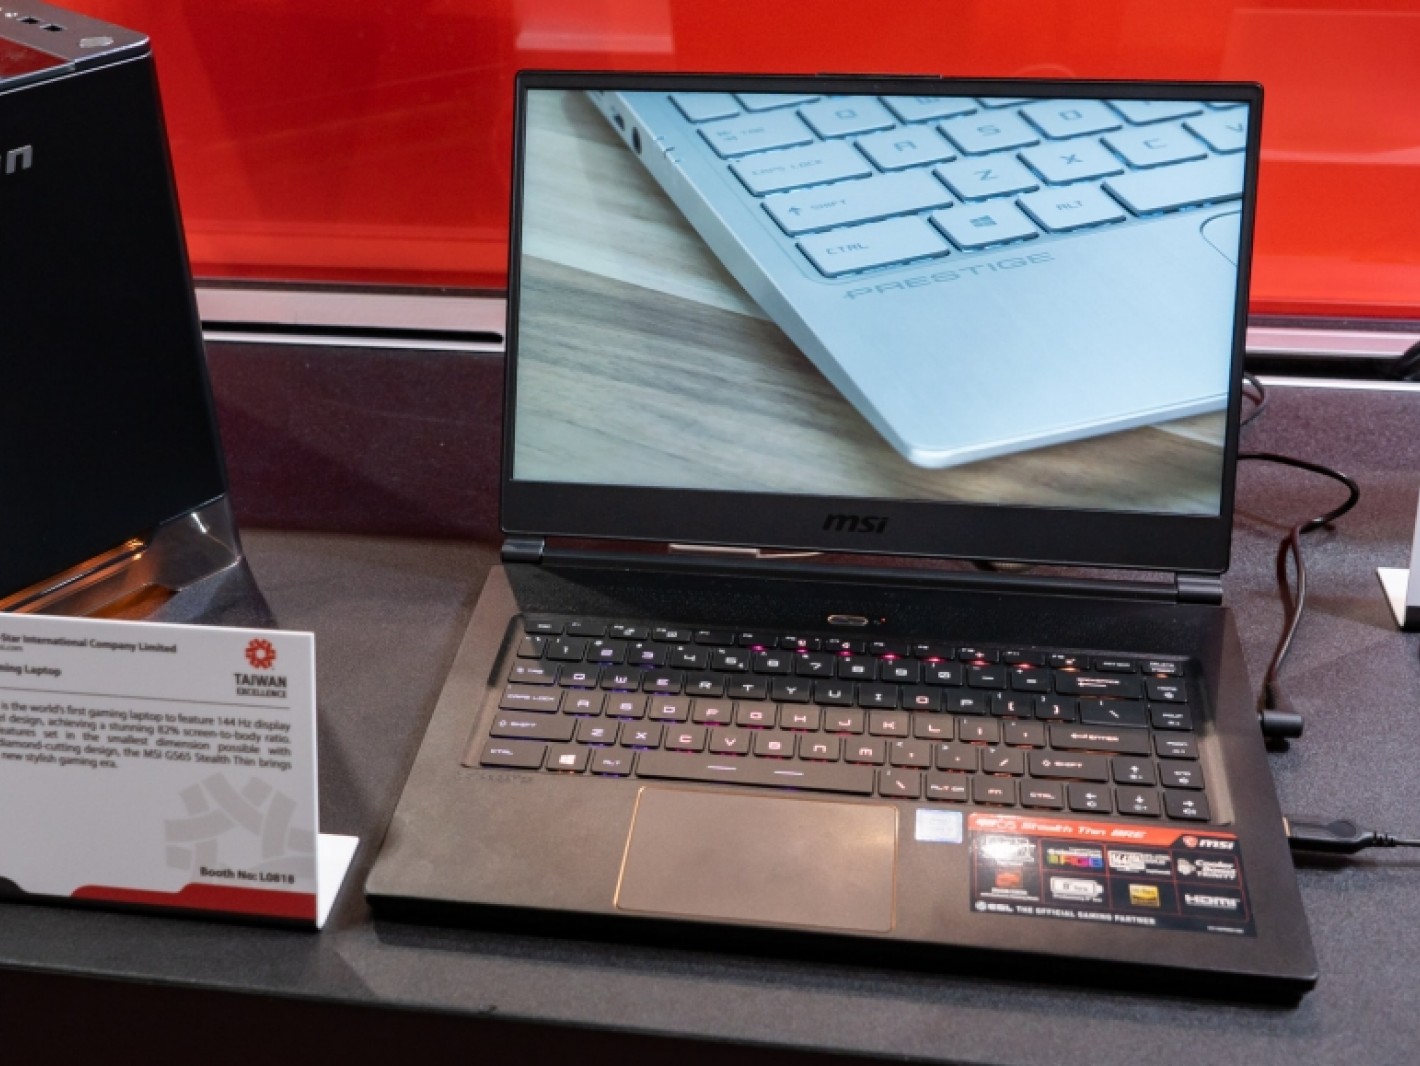 MSI GS65 Stealth Gaming-Notebook